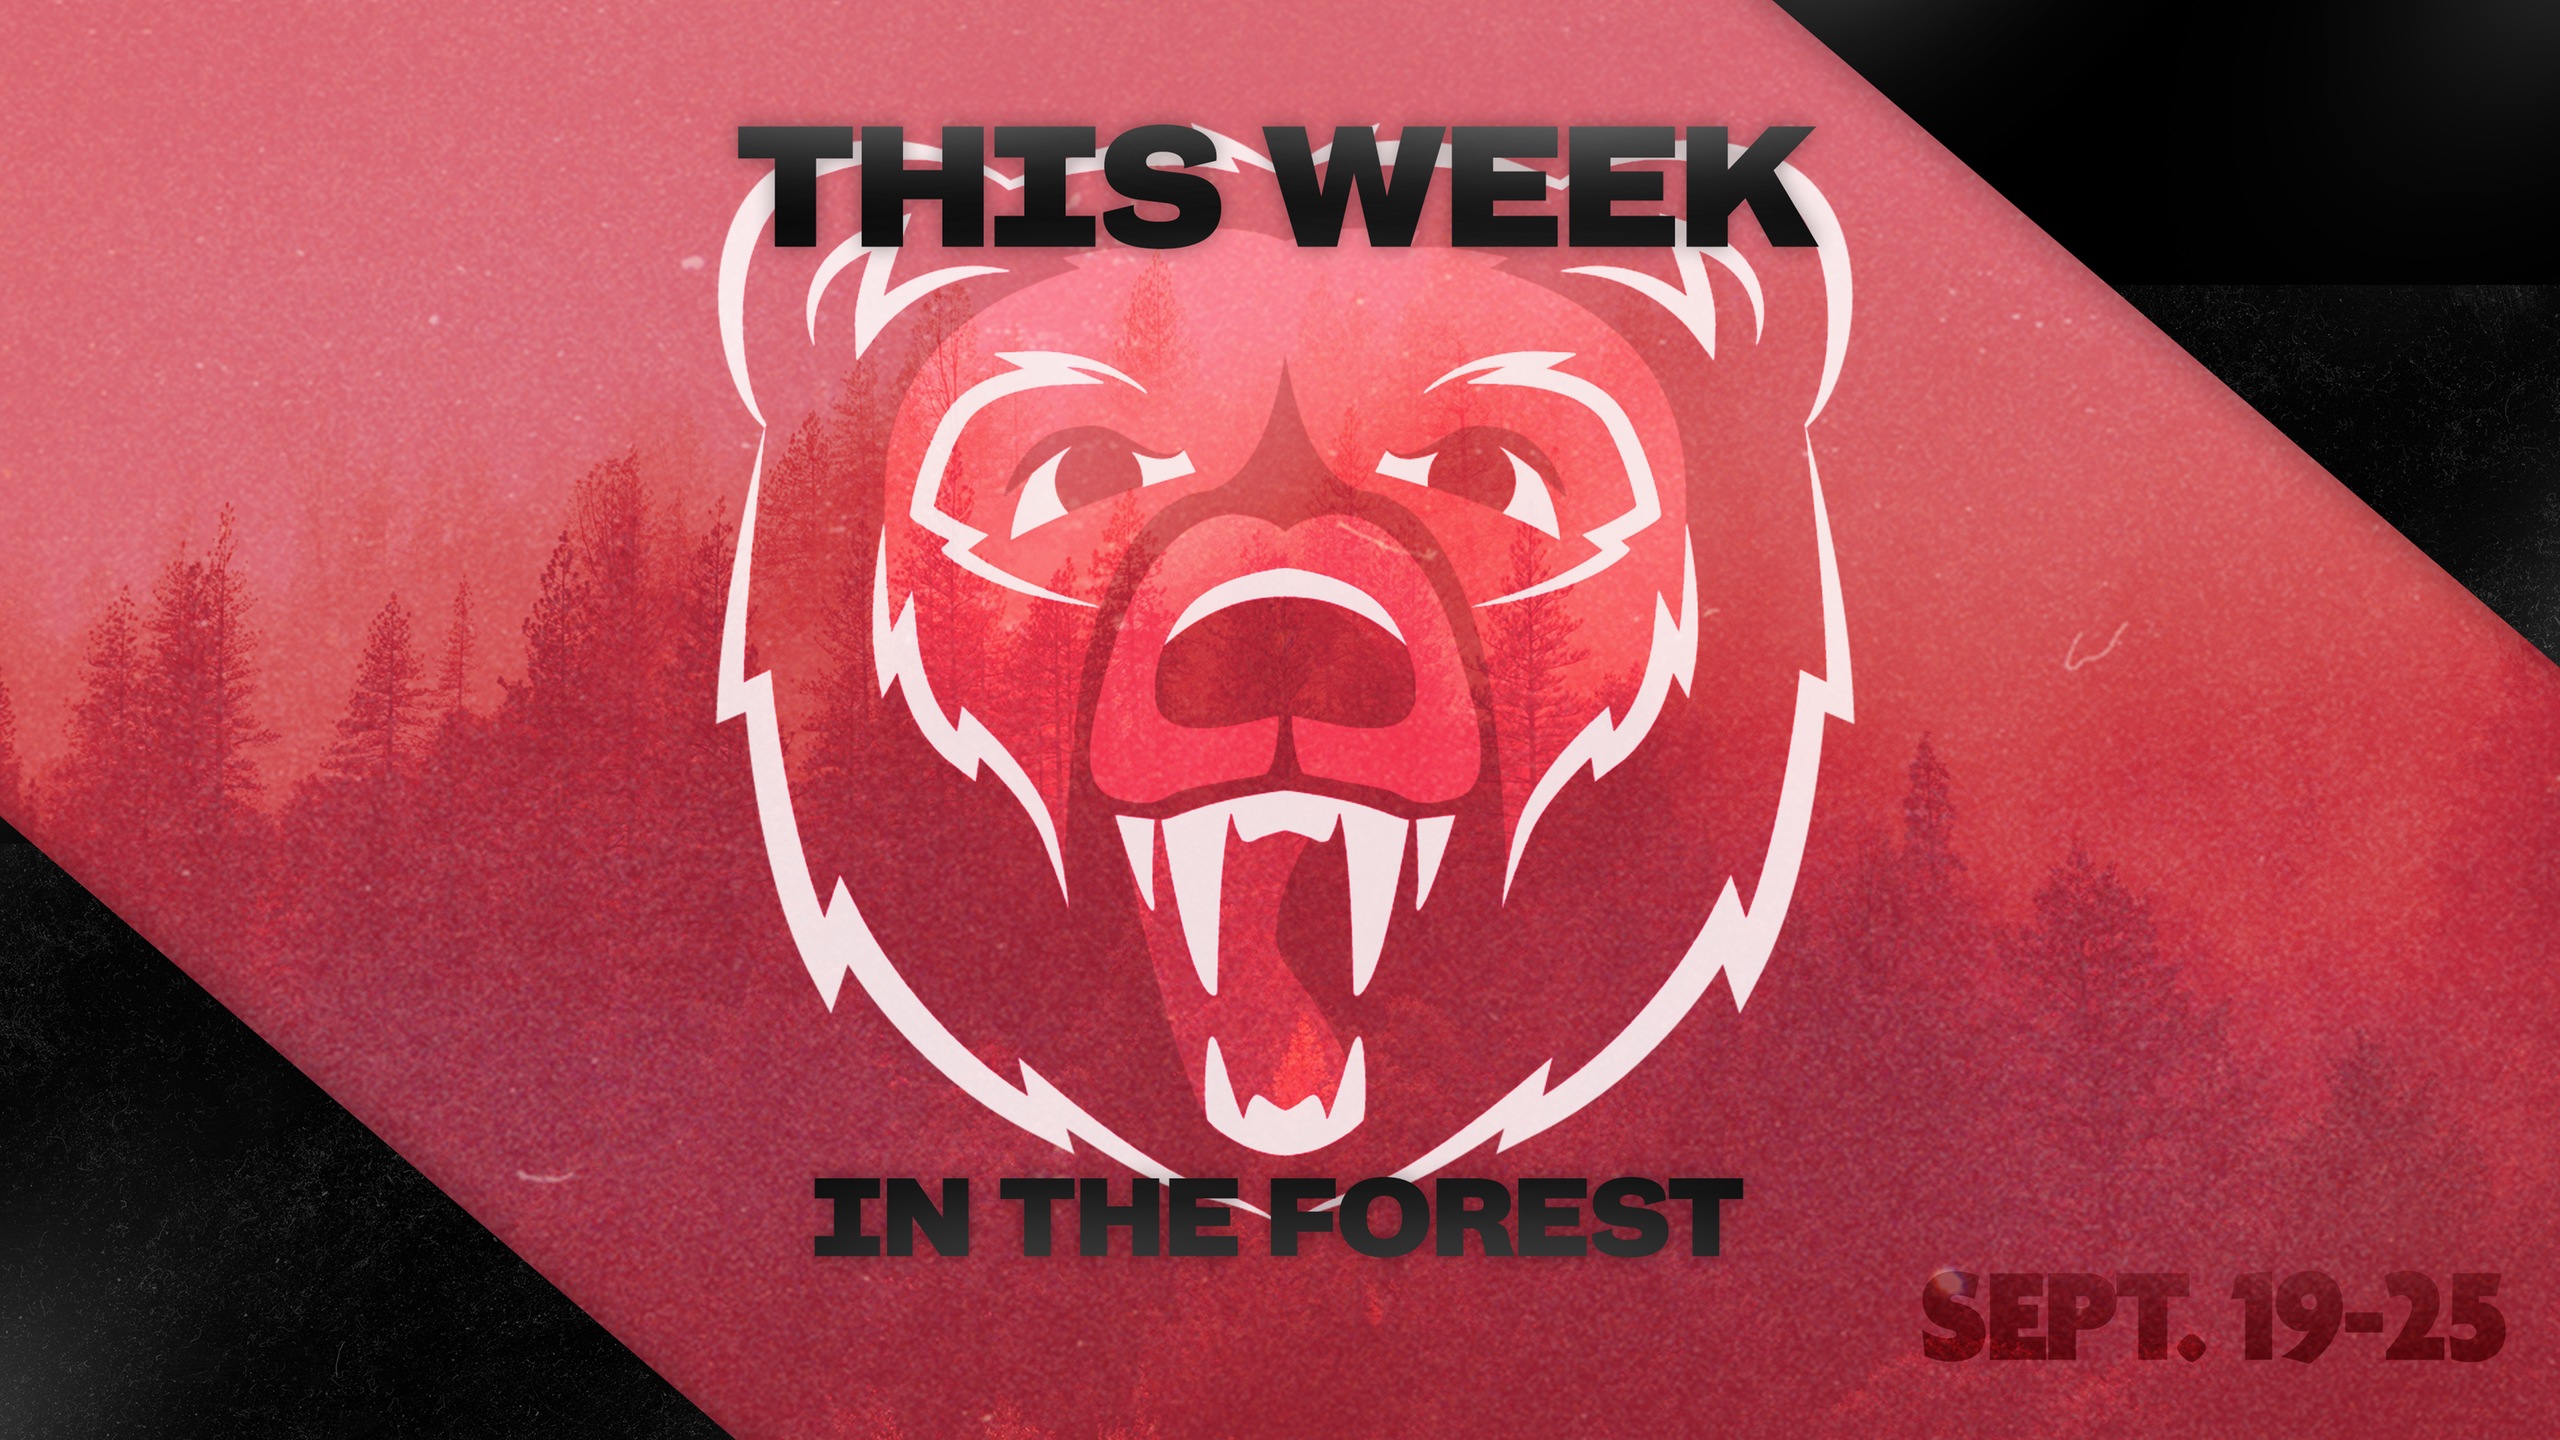 This Week in The Forest: Sept. 19-25